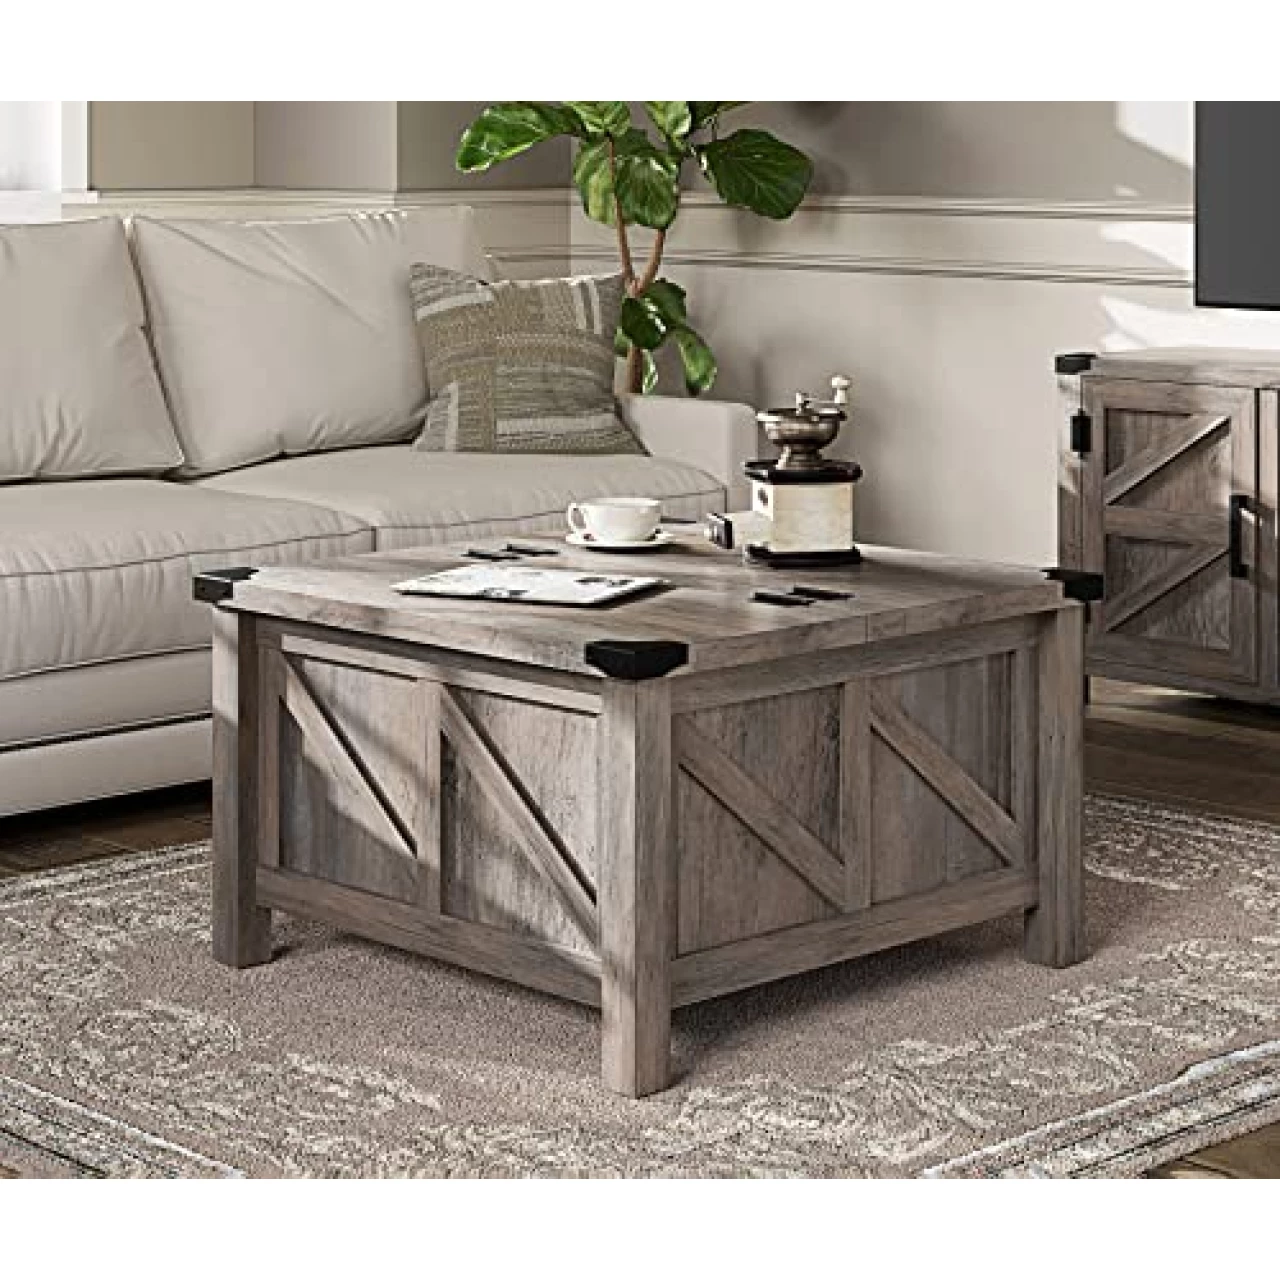 WAMPAT Square Coffee Table, Rustic Farmhouse Center Table with Lift Top and Storage for Living Room